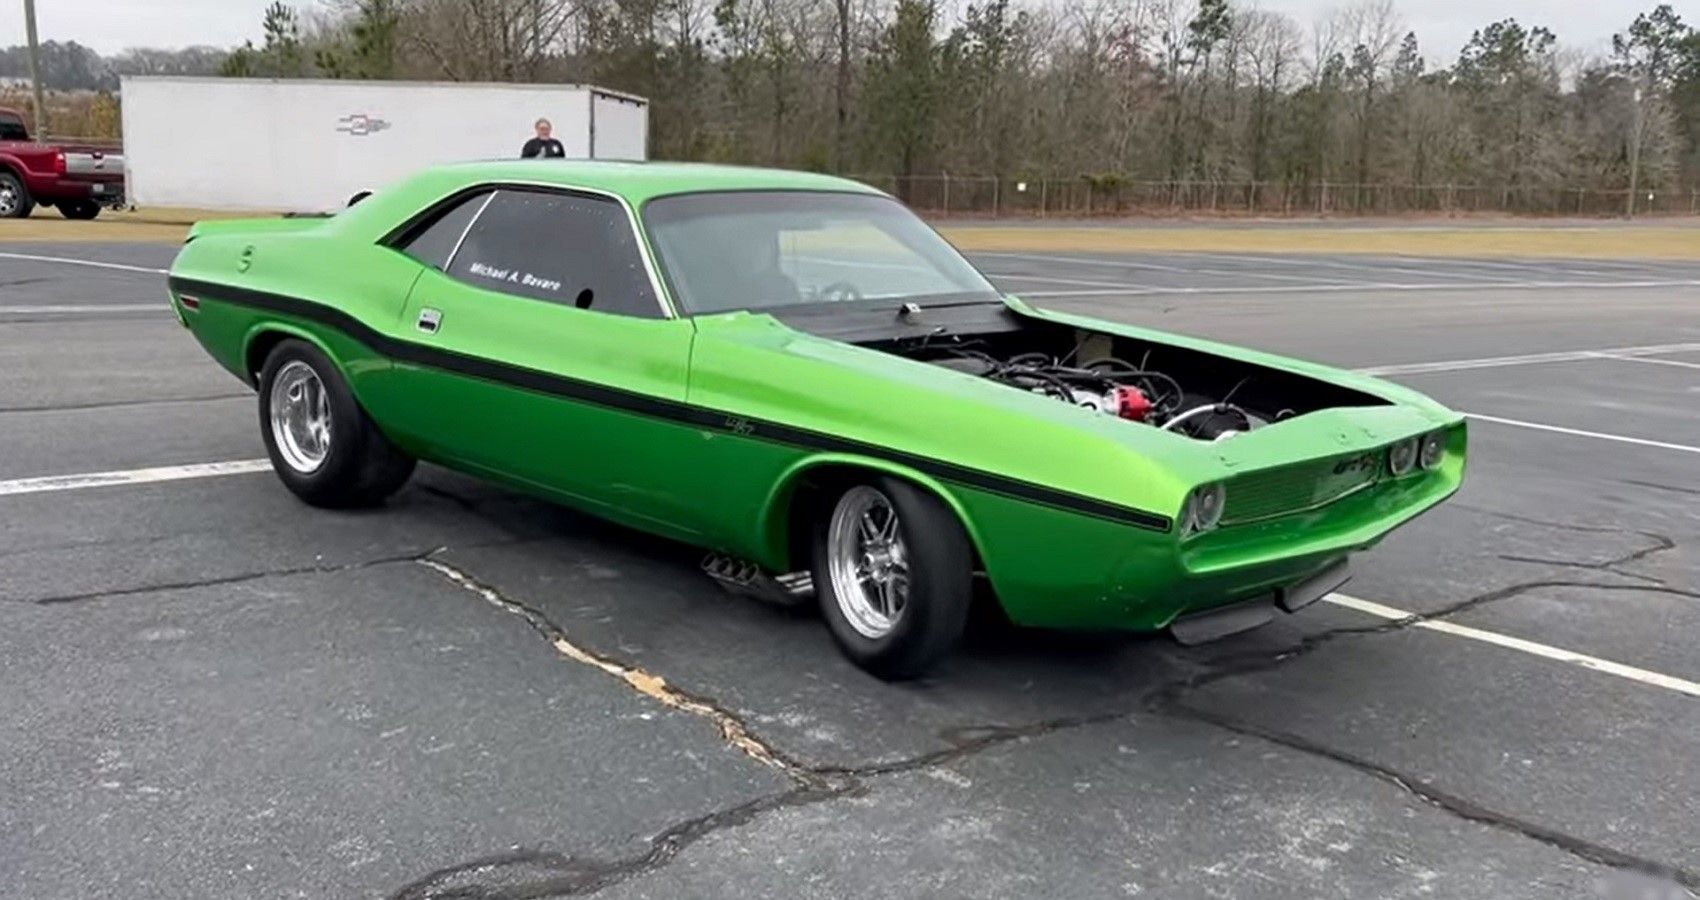 This LS-Swapped Dodge Challenger With Procharger Provides The Best Power-To-Buck Ratio